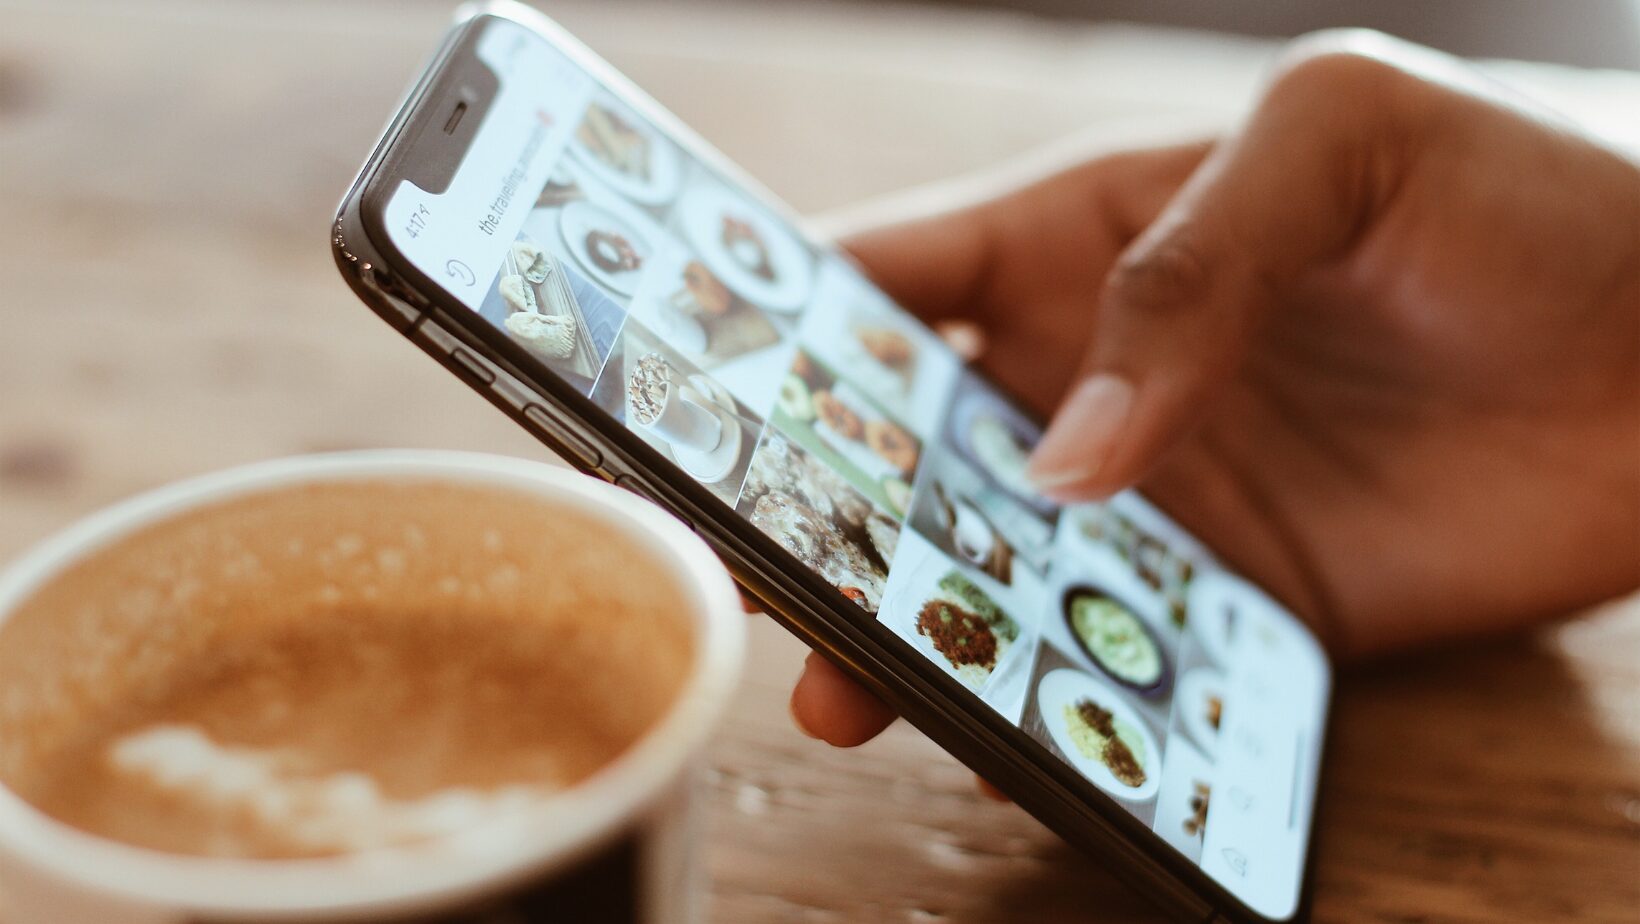 Person with phone in hand displaying the Instagram app next to a cup of coffee.